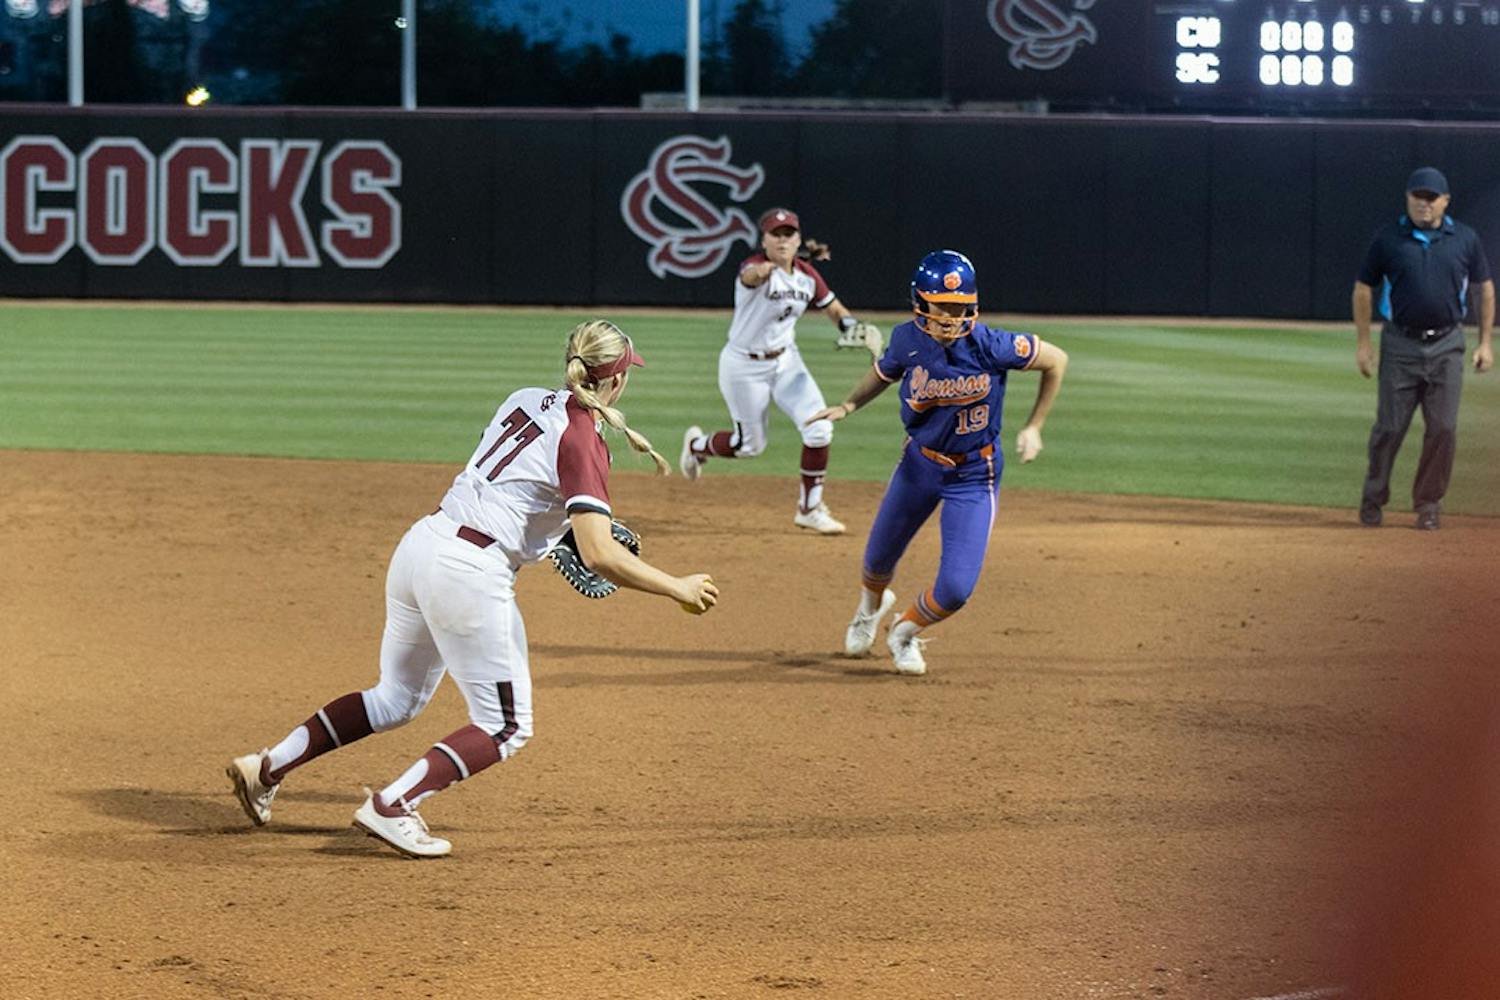 Senior infielder Kassidy Krupit heading back to first base to out a Clemson player attempting to steal second base on April 12, 2022 at the Carolina Softball Stadium in Columbia, SC. Krupit made seven putouts during the game against Clemson.